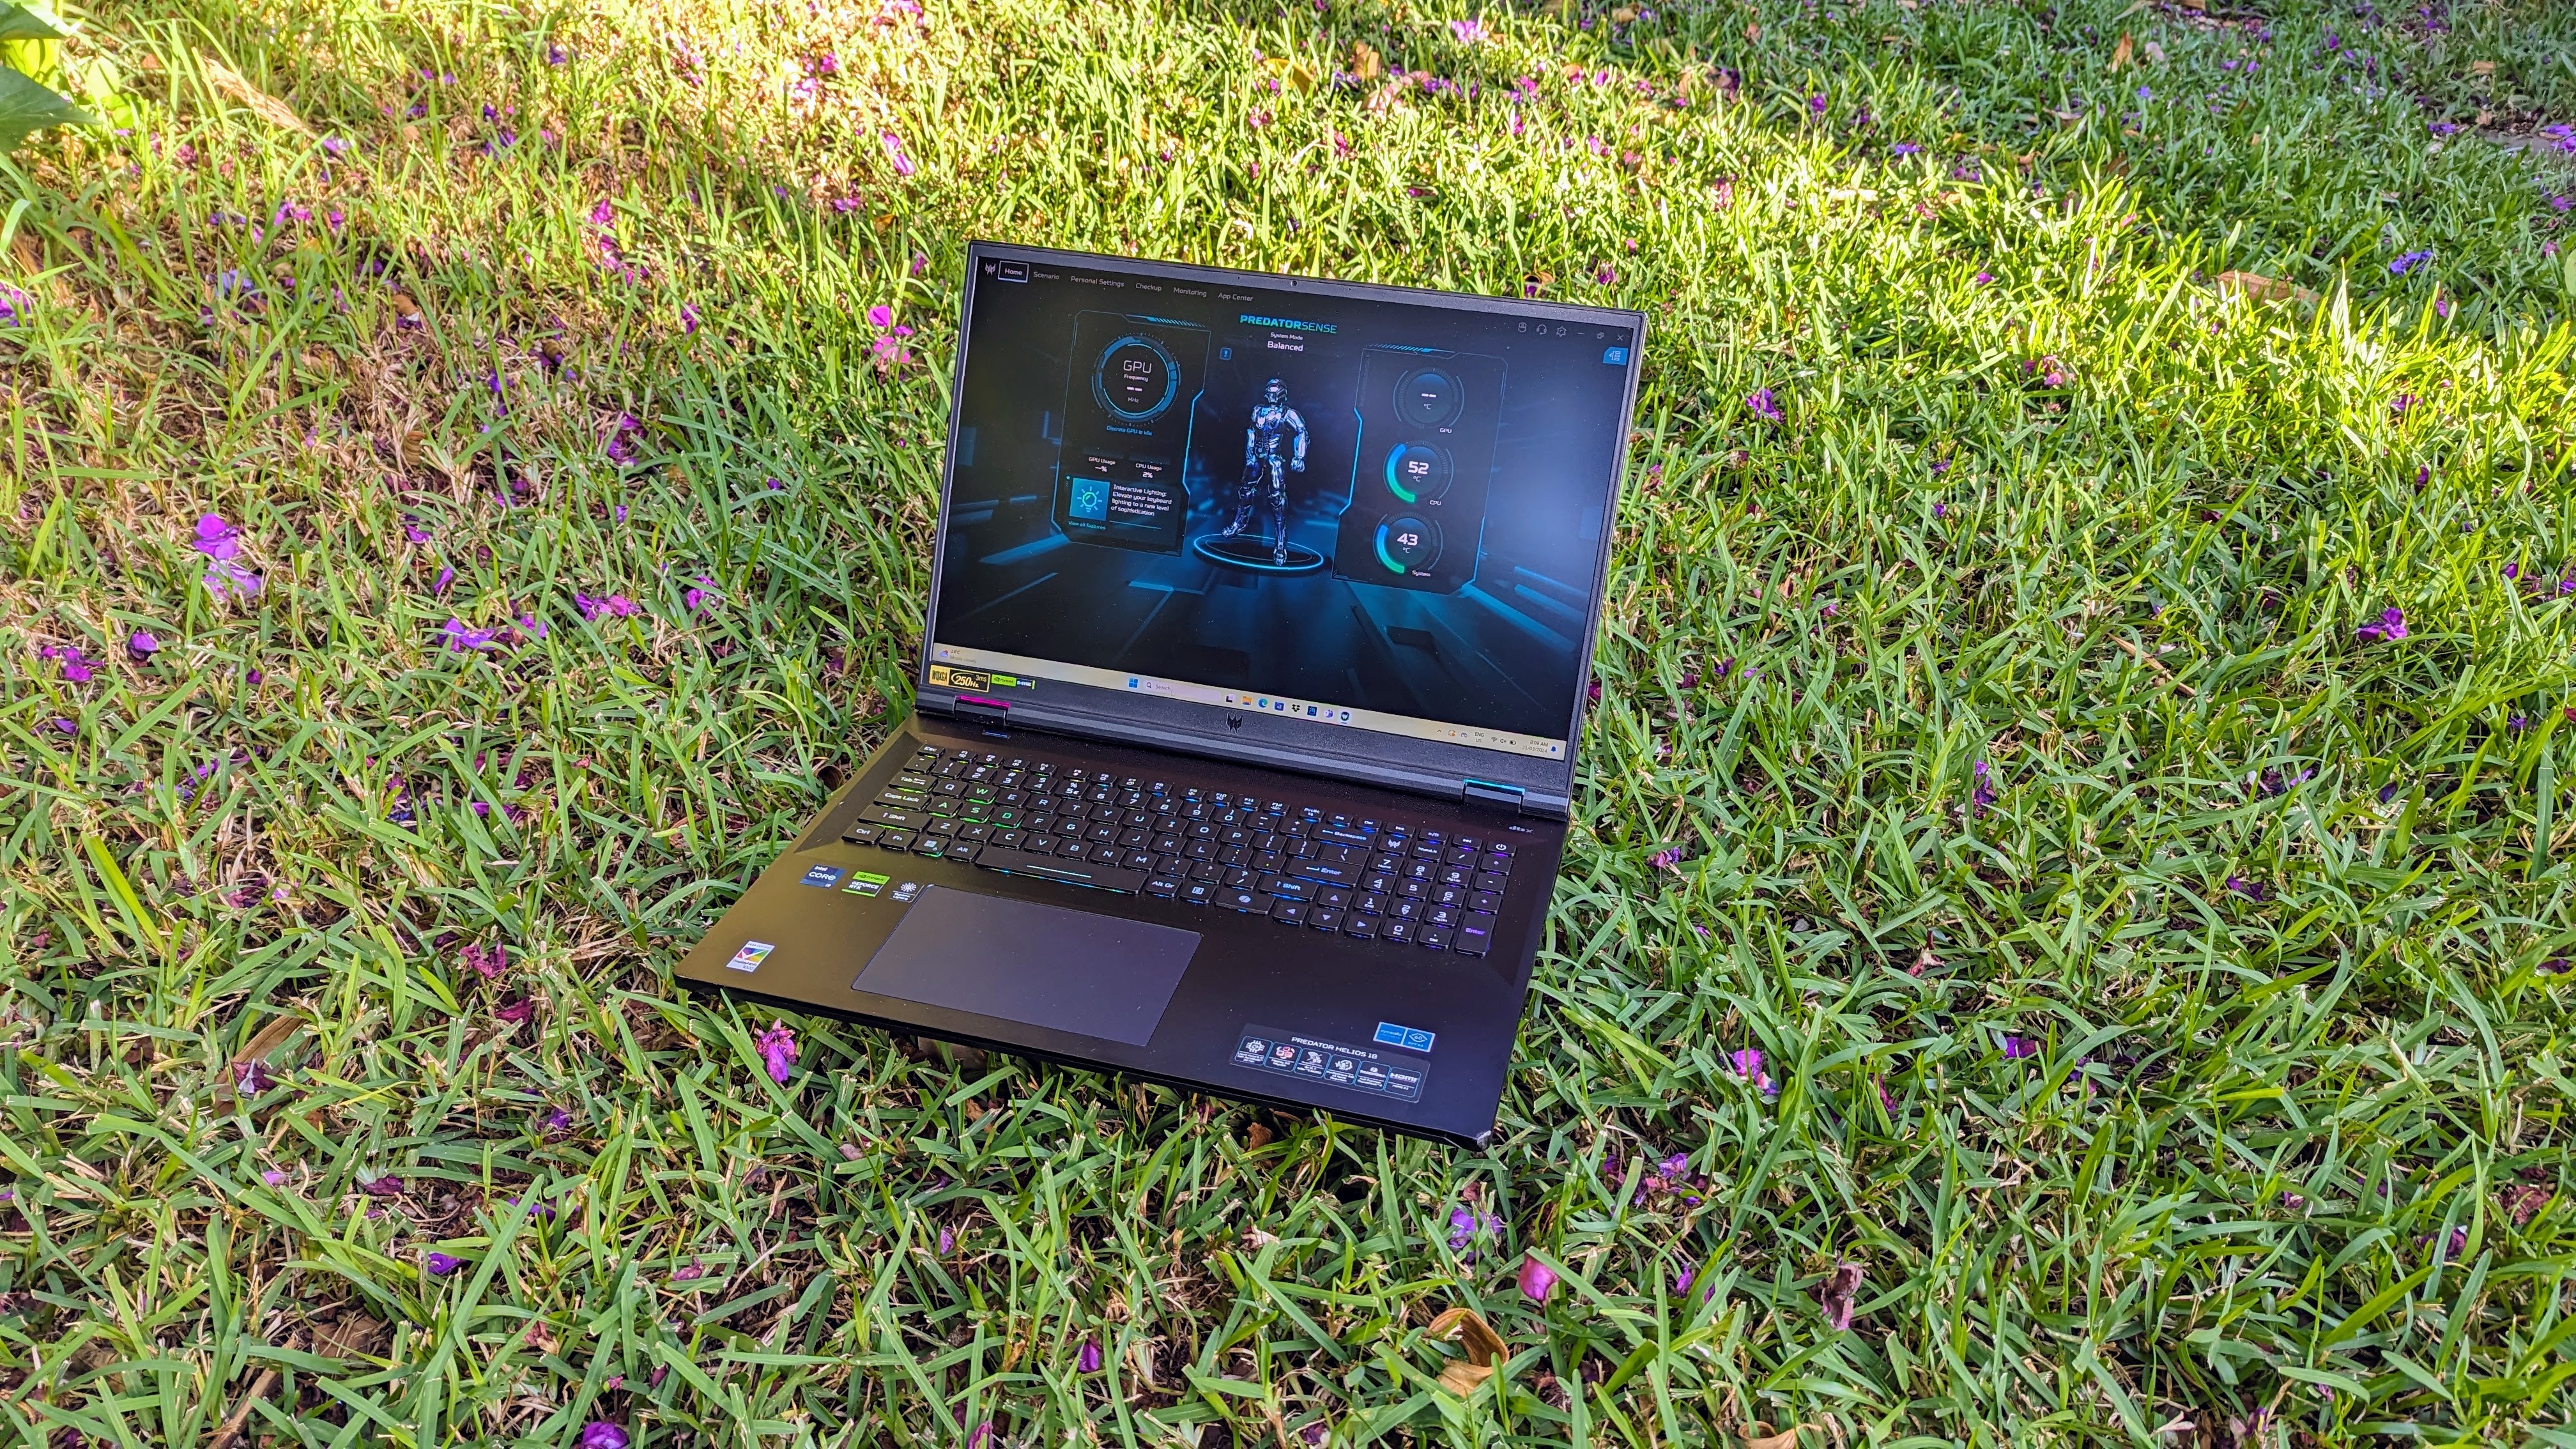 Acer Predator Helios Neo 18 review: a monster gaming laptop that goes all out